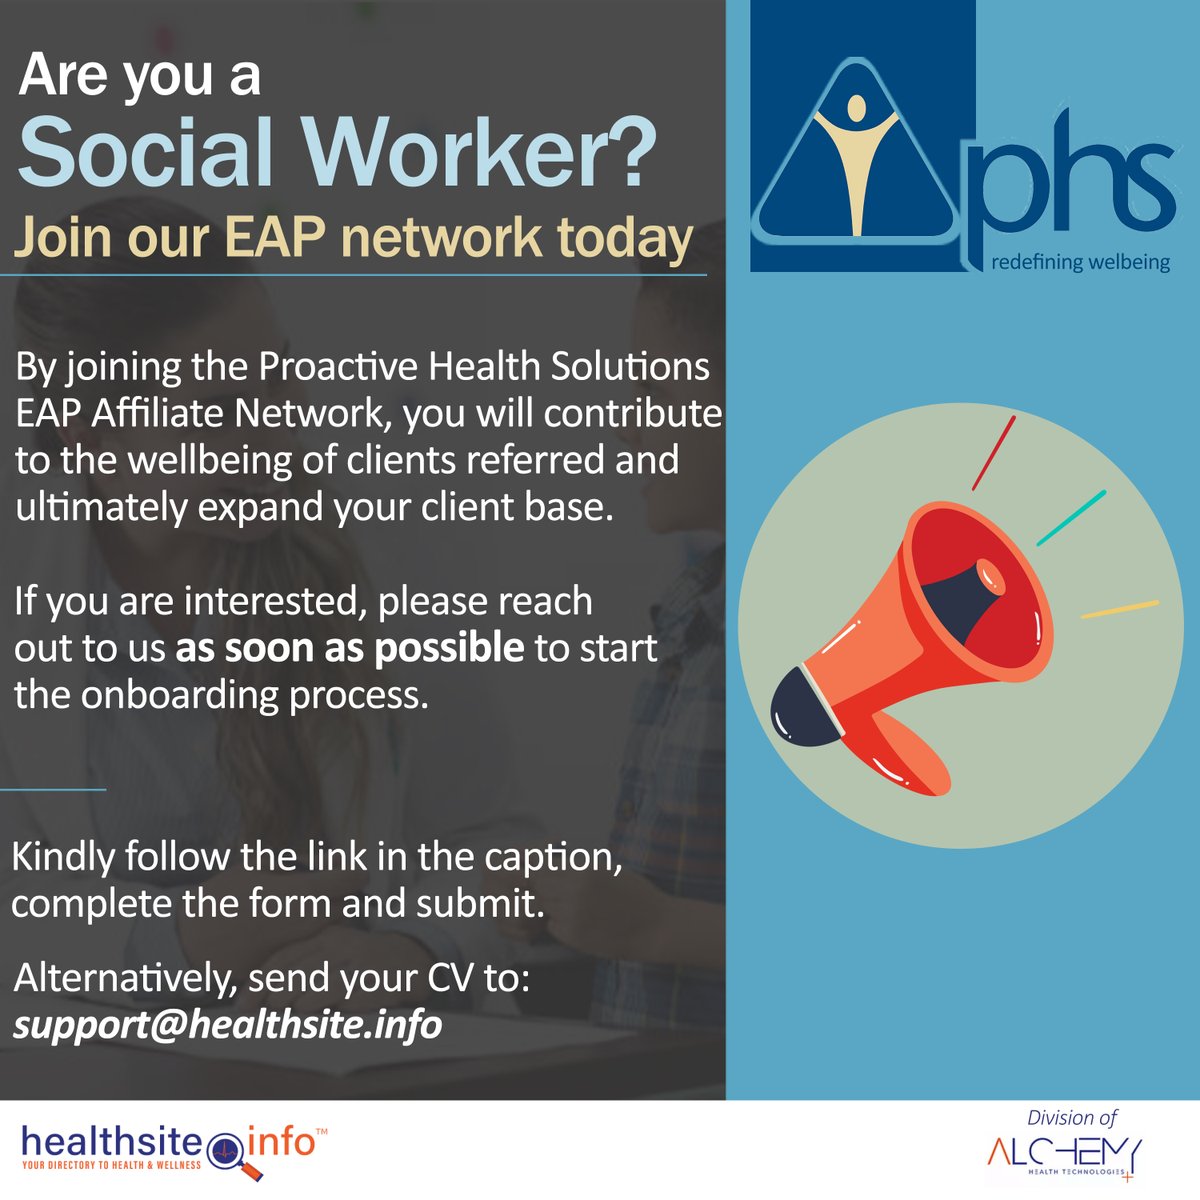 Calling on Social Workers to join our EAP Affiliate Network! 📣 Click on the provided link to explore further details and kickstart your onboarding journey. [ healthsite.info/link/article?n… ] #healthcarepractitioners #EAP #Network #alchemyhealth #healthsite.info